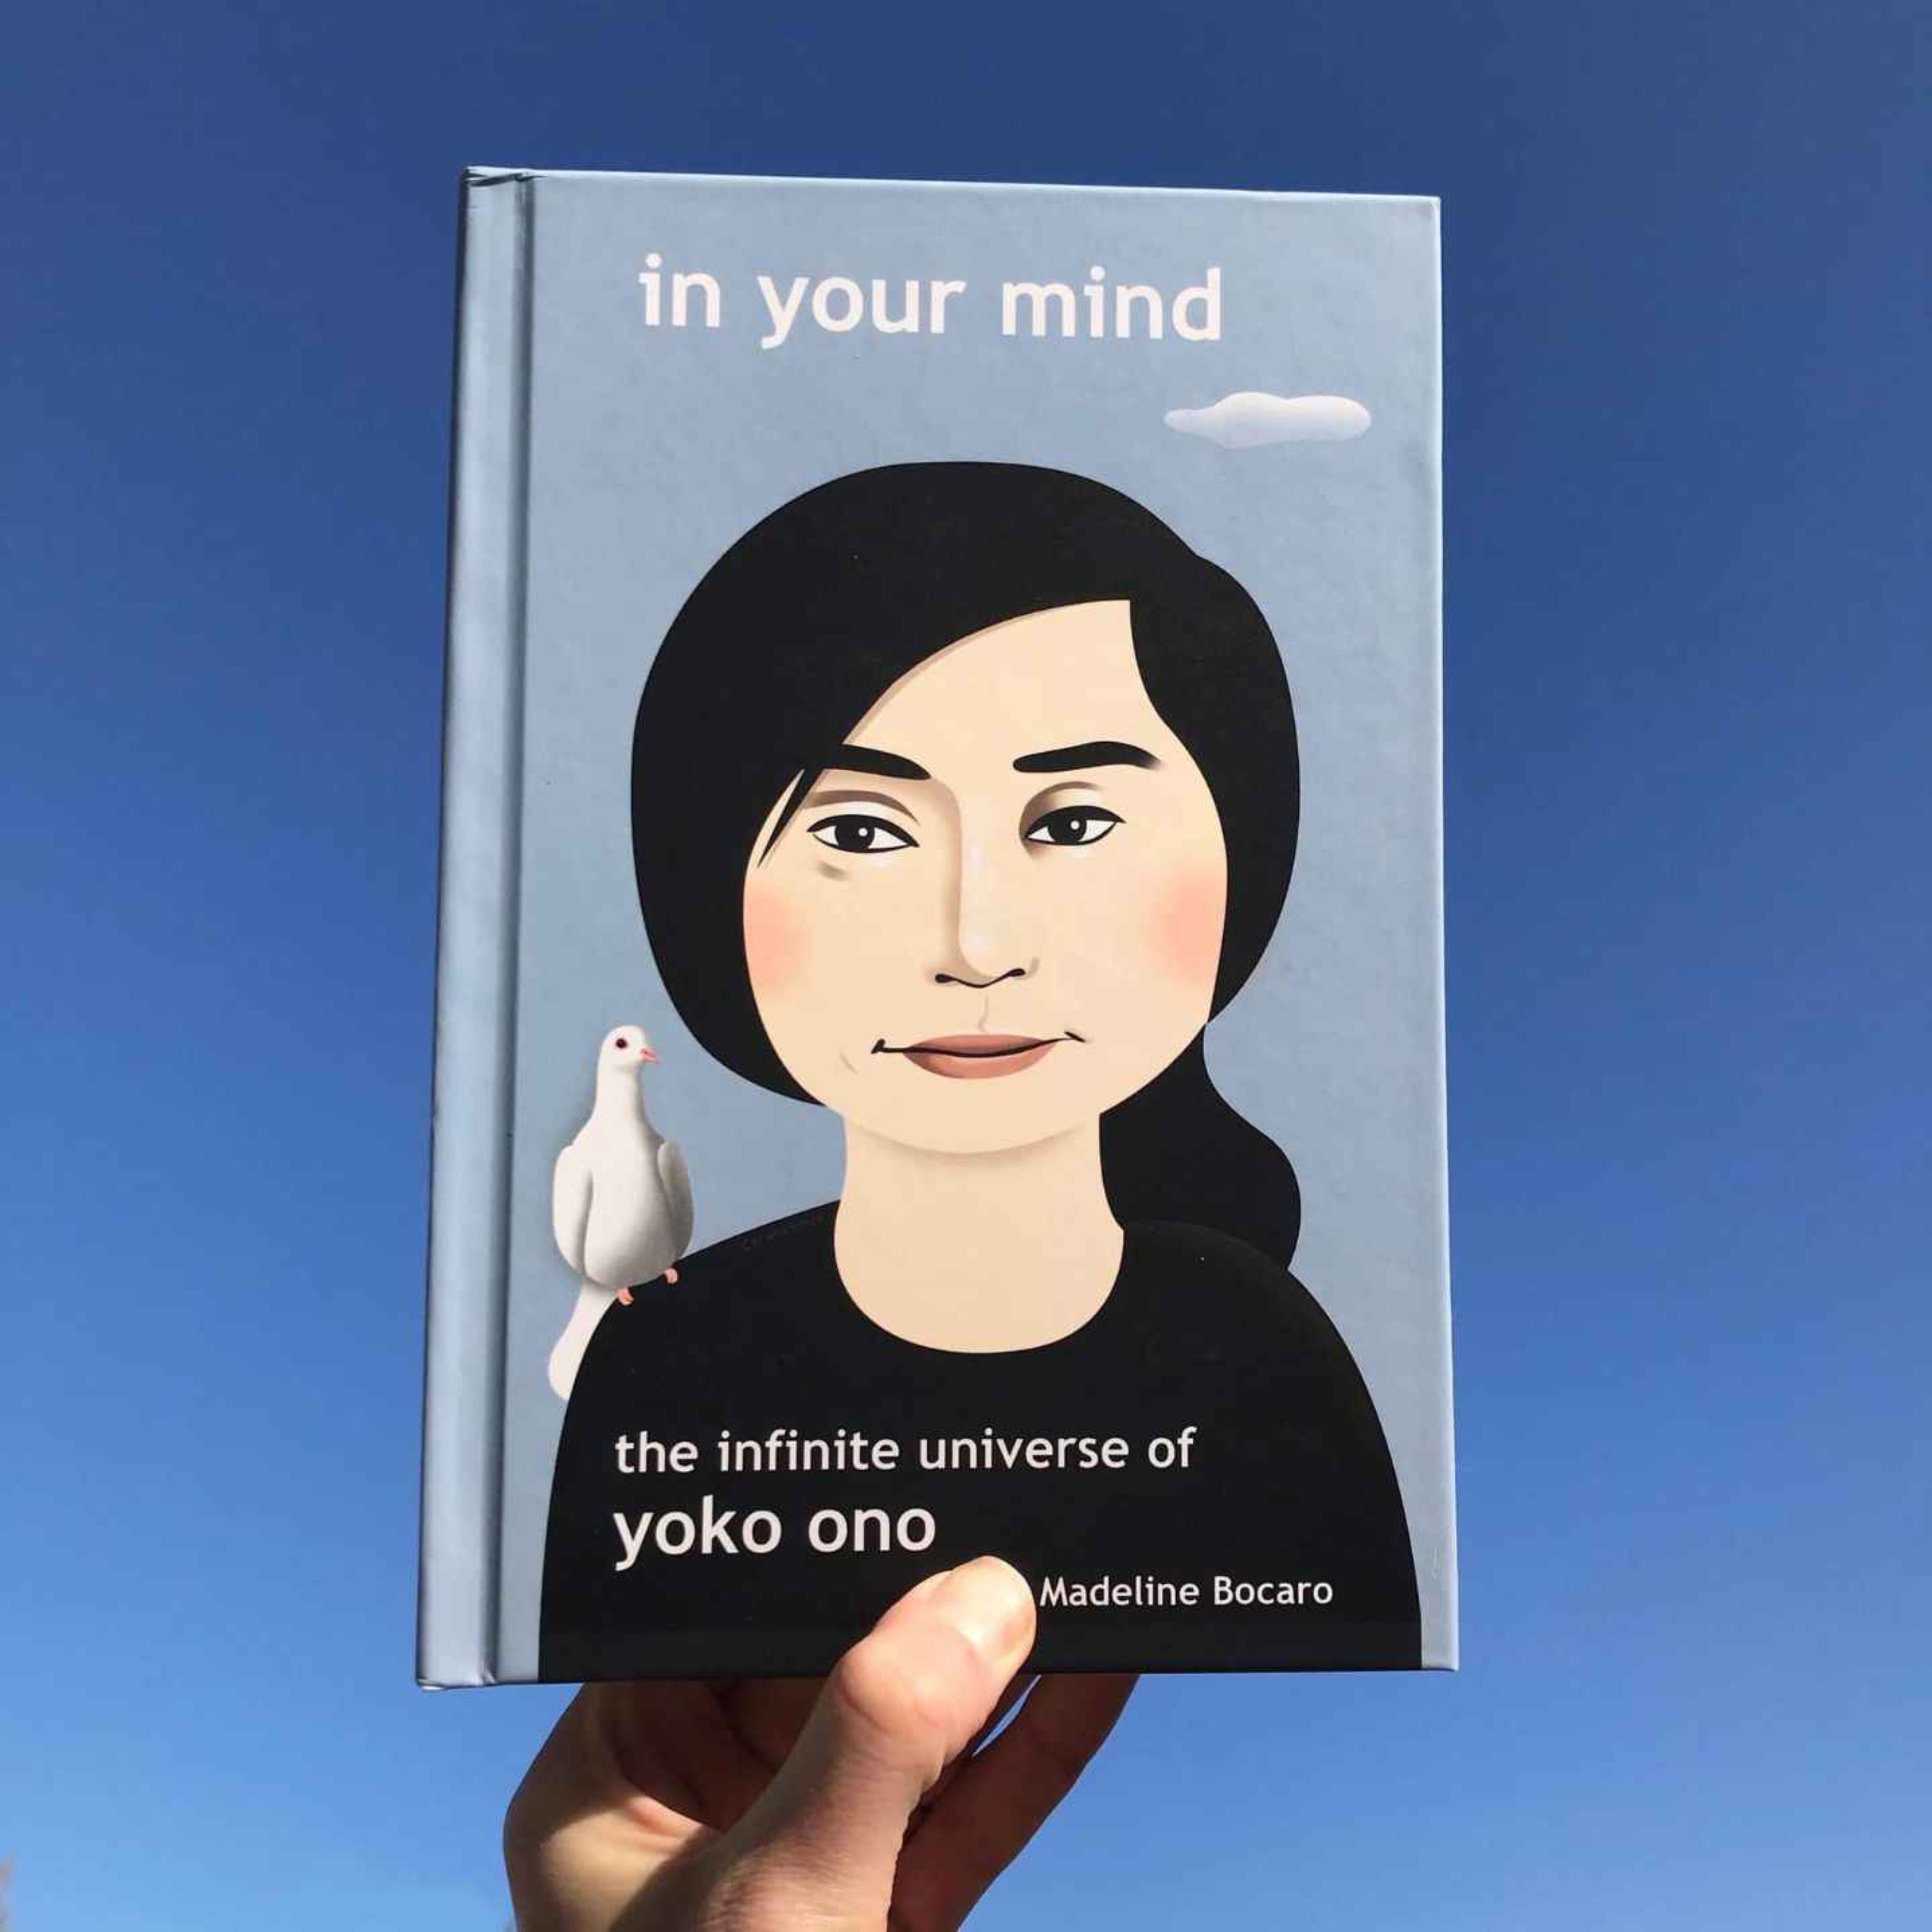 cover art for Yoko Ono; A new book by Madeline Bocaro